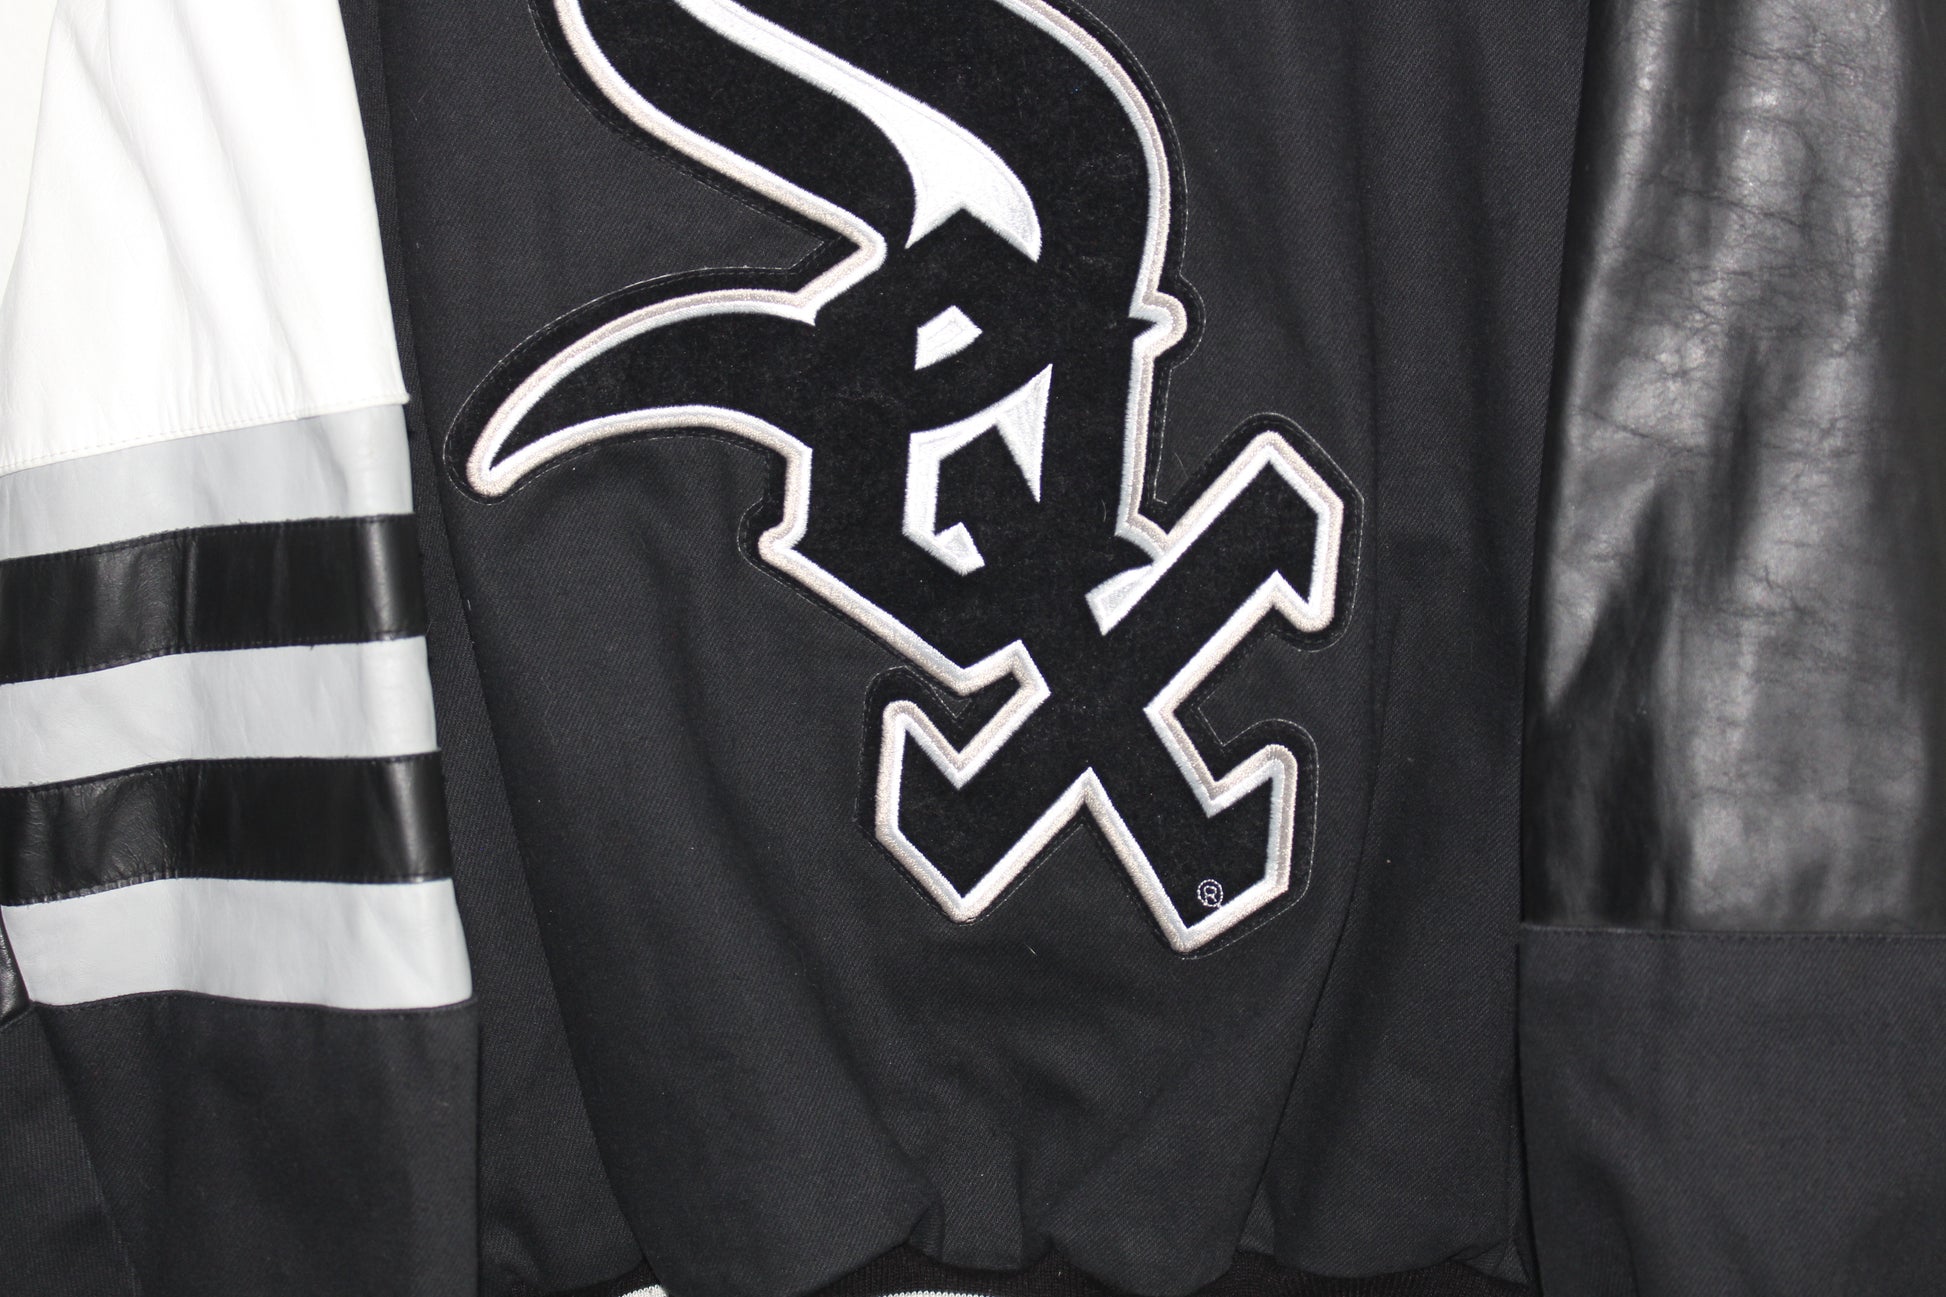 Chicago White Sox Vintage in Chicago White Sox Team Shop 